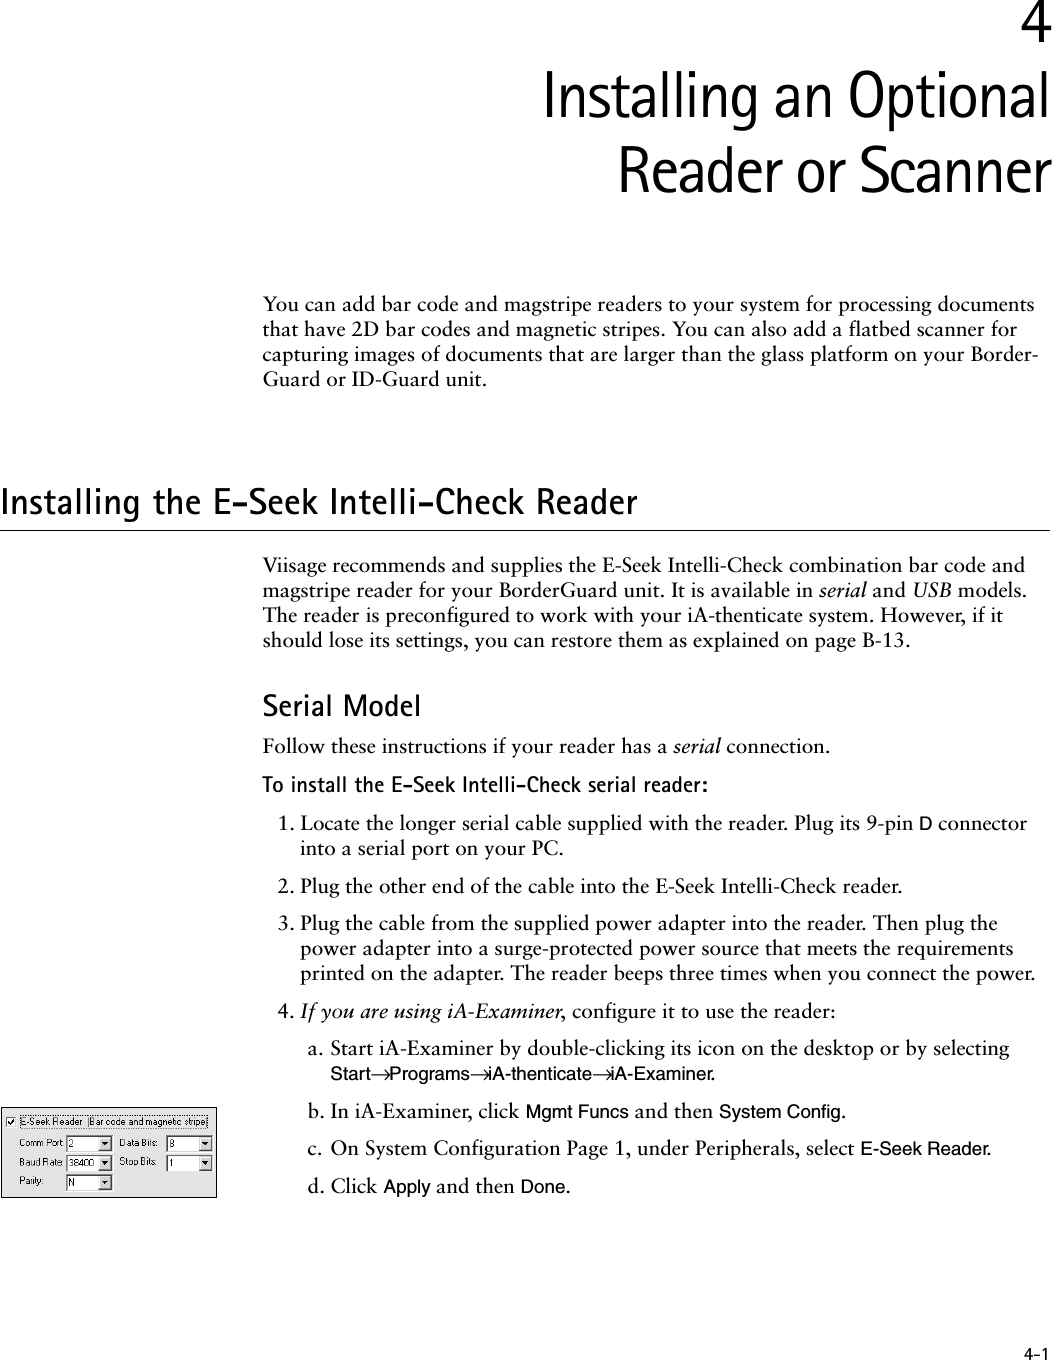 4-14Installing an OptionalReader or ScannerYou can add bar code and magstripe readers to your system for processing documents that have 2D bar codes and magnetic stripes. You can also add a flatbed scanner for capturing images of documents that are larger than the glass platform on your Border-Guard or ID-Guard unit.Installing the E-Seek Intelli-Check ReaderViisage recommends and supplies the E-Seek Intelli-Check combination bar code and magstripe reader for your BorderGuard unit. It is available in serial and USB models. The reader is preconfigured to work with your iA-thenticate system. However, if it should lose its settings, you can restore them as explained on page B-13.Serial ModelFollow these instructions if your reader has a serial connection.To install the E-Seek Intelli-Check serial reader:1. Locate the longer serial cable supplied with the reader. Plug its 9-pin D connector into a serial port on your PC.2. Plug the other end of the cable into the E-Seek Intelli-Check reader.3. Plug the cable from the supplied power adapter into the reader. Then plug the power adapter into a surge-protected power source that meets the requirements printed on the adapter. The reader beeps three times when you connect the power.4. If you are using iA-Examiner, configure it to use the reader:a. Start iA-Examiner by double-clicking its icon on the desktop or by selecting Start→ Programs→ iA-thenticate→ iA-Examiner.b. In iA-Examiner, click Mgmt Funcs and then System Config.c. On System Configuration Page 1, under Peripherals, select E-Seek Reader.d. Click Apply and then Done.